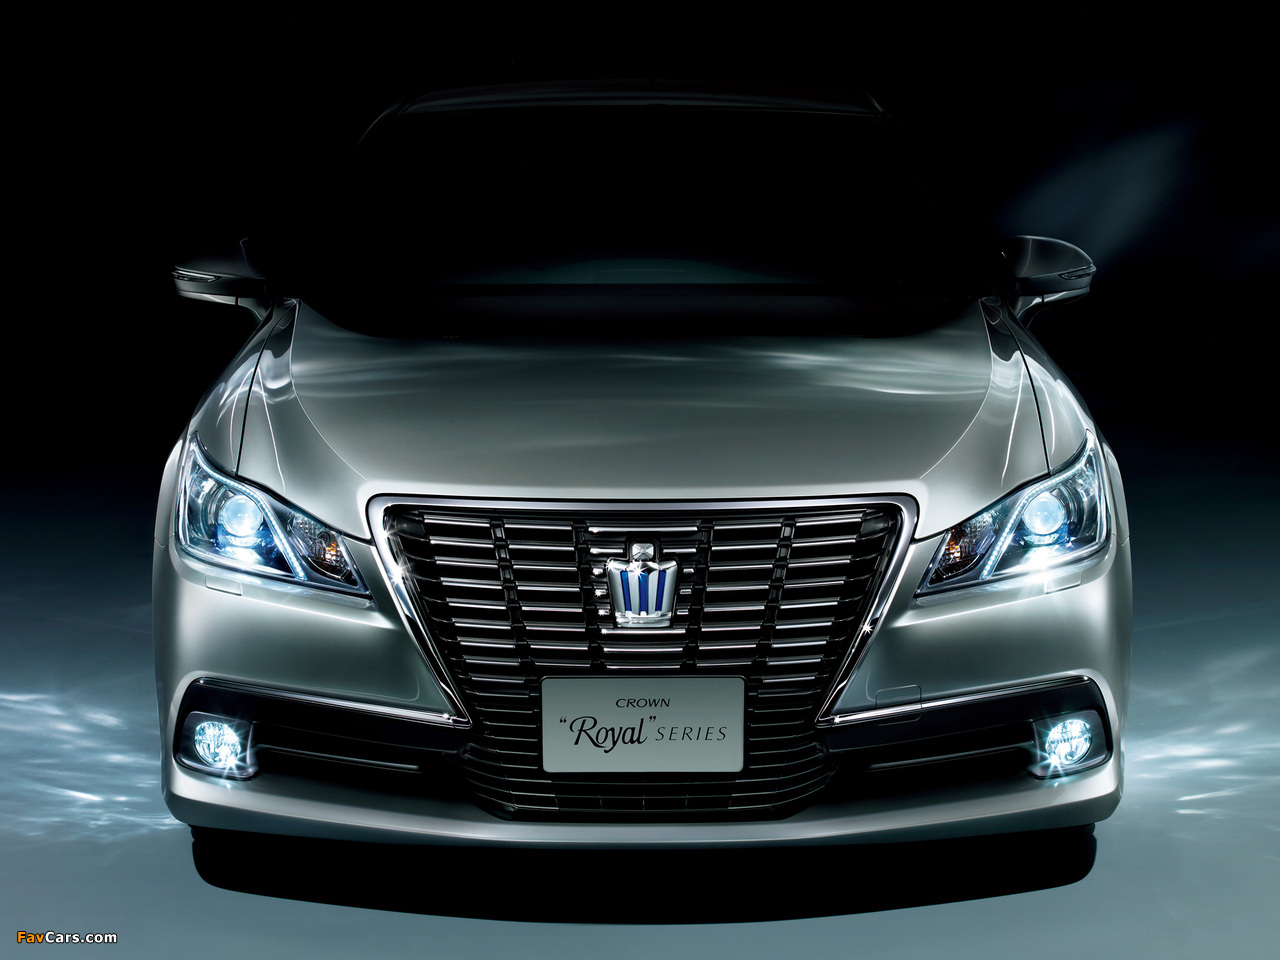 Toyota Crown Hybrid Royal Saloon (S210) 2012 pictures (1280 x 960)